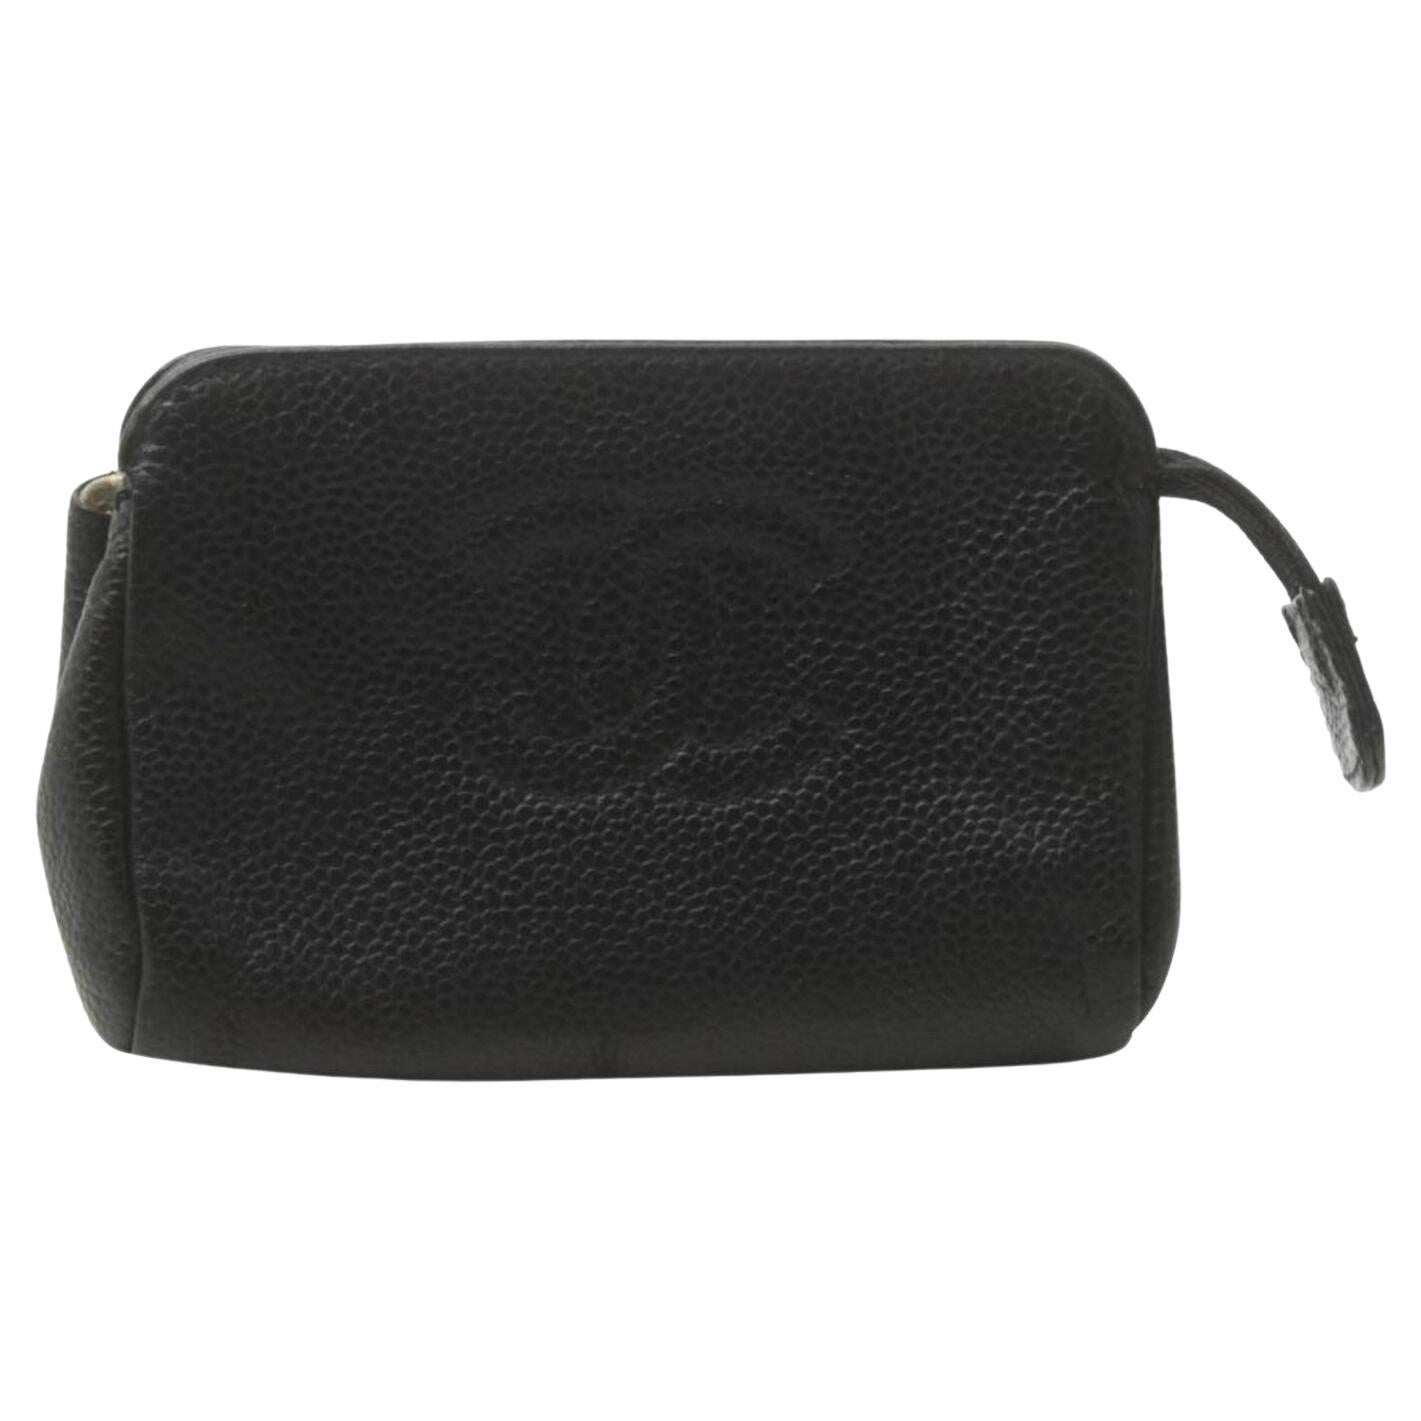 Chanel Black Caviar Leather CC Zip Pouch Cosmetic Case  861909